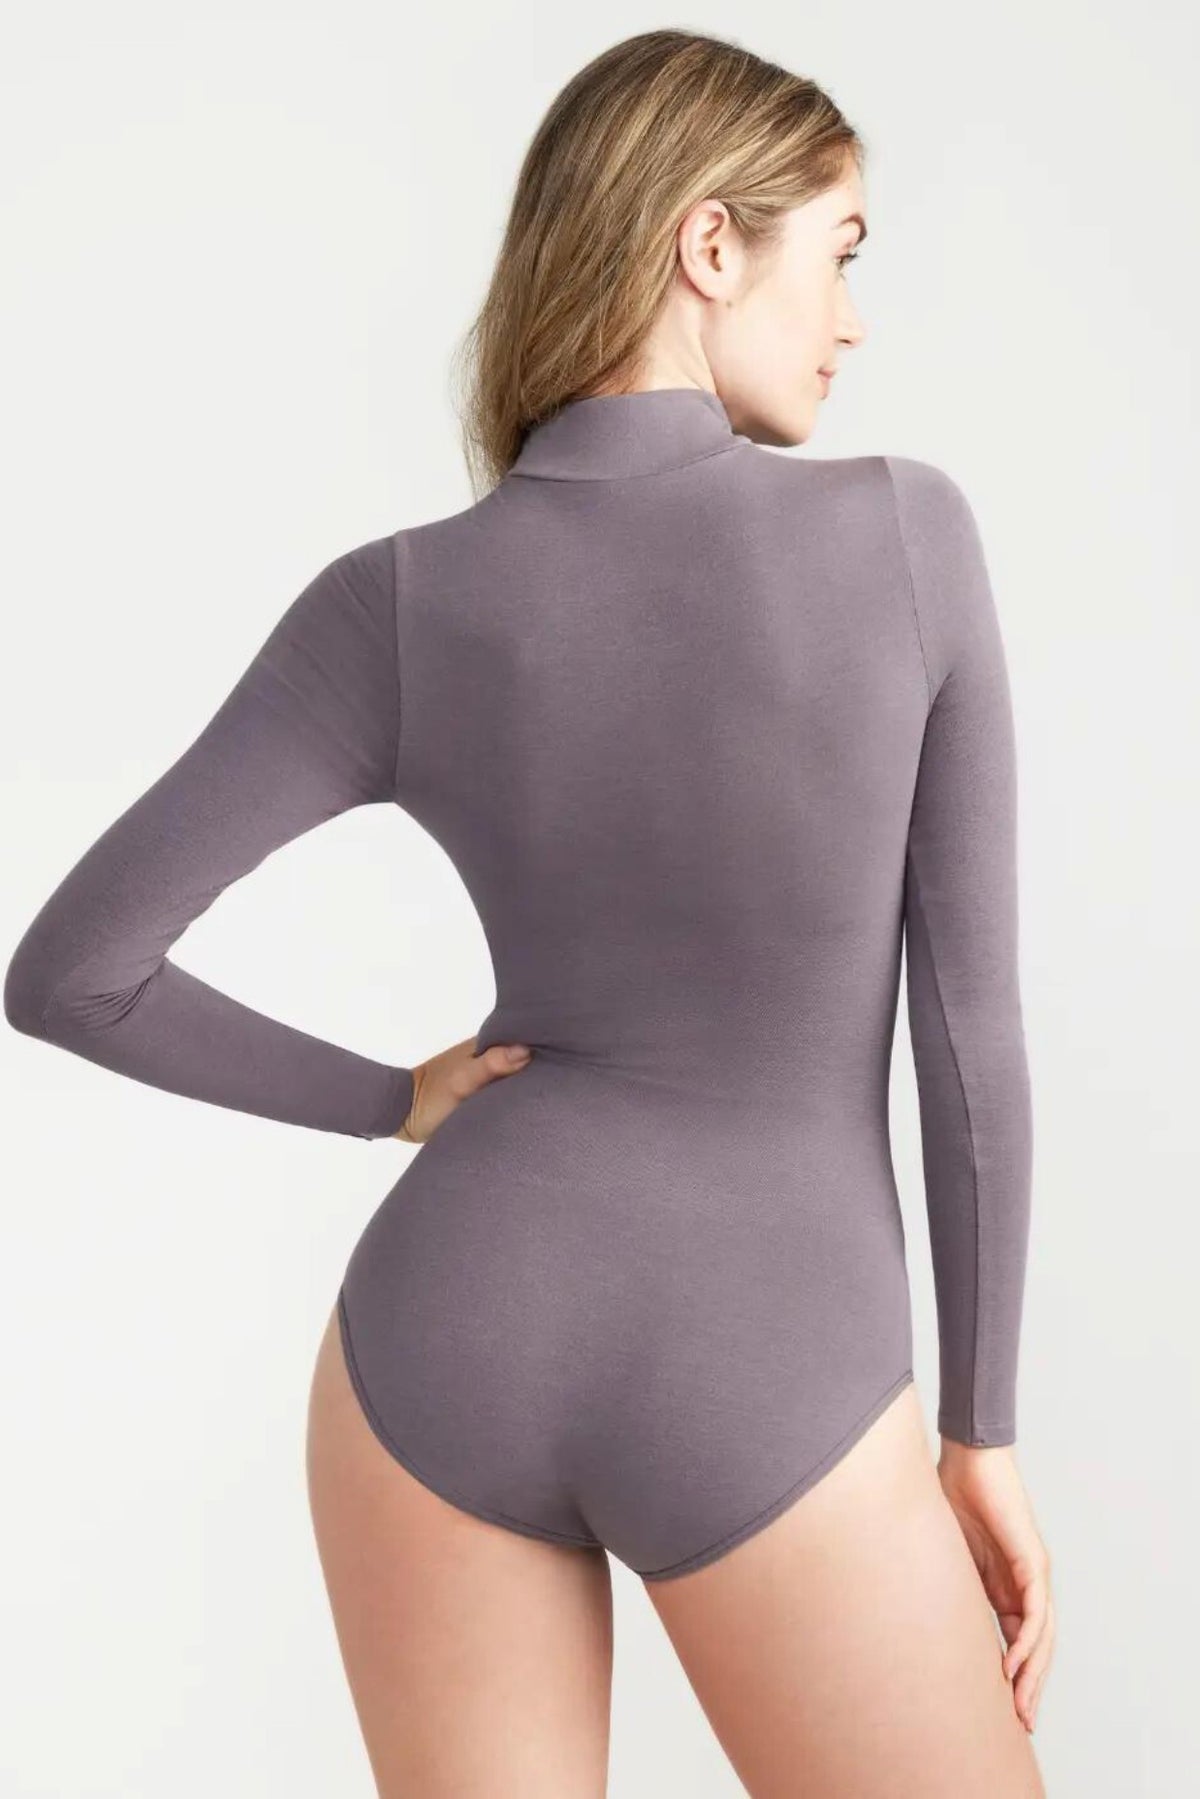 GUUDIA Spandex Seamless Body Shaper Thong Elastic Body Suit For Women With  Control Long Sleeve, Open Crotch, Big U Neck, And Seamless Design Style  231117 From Zhao07, $9.67